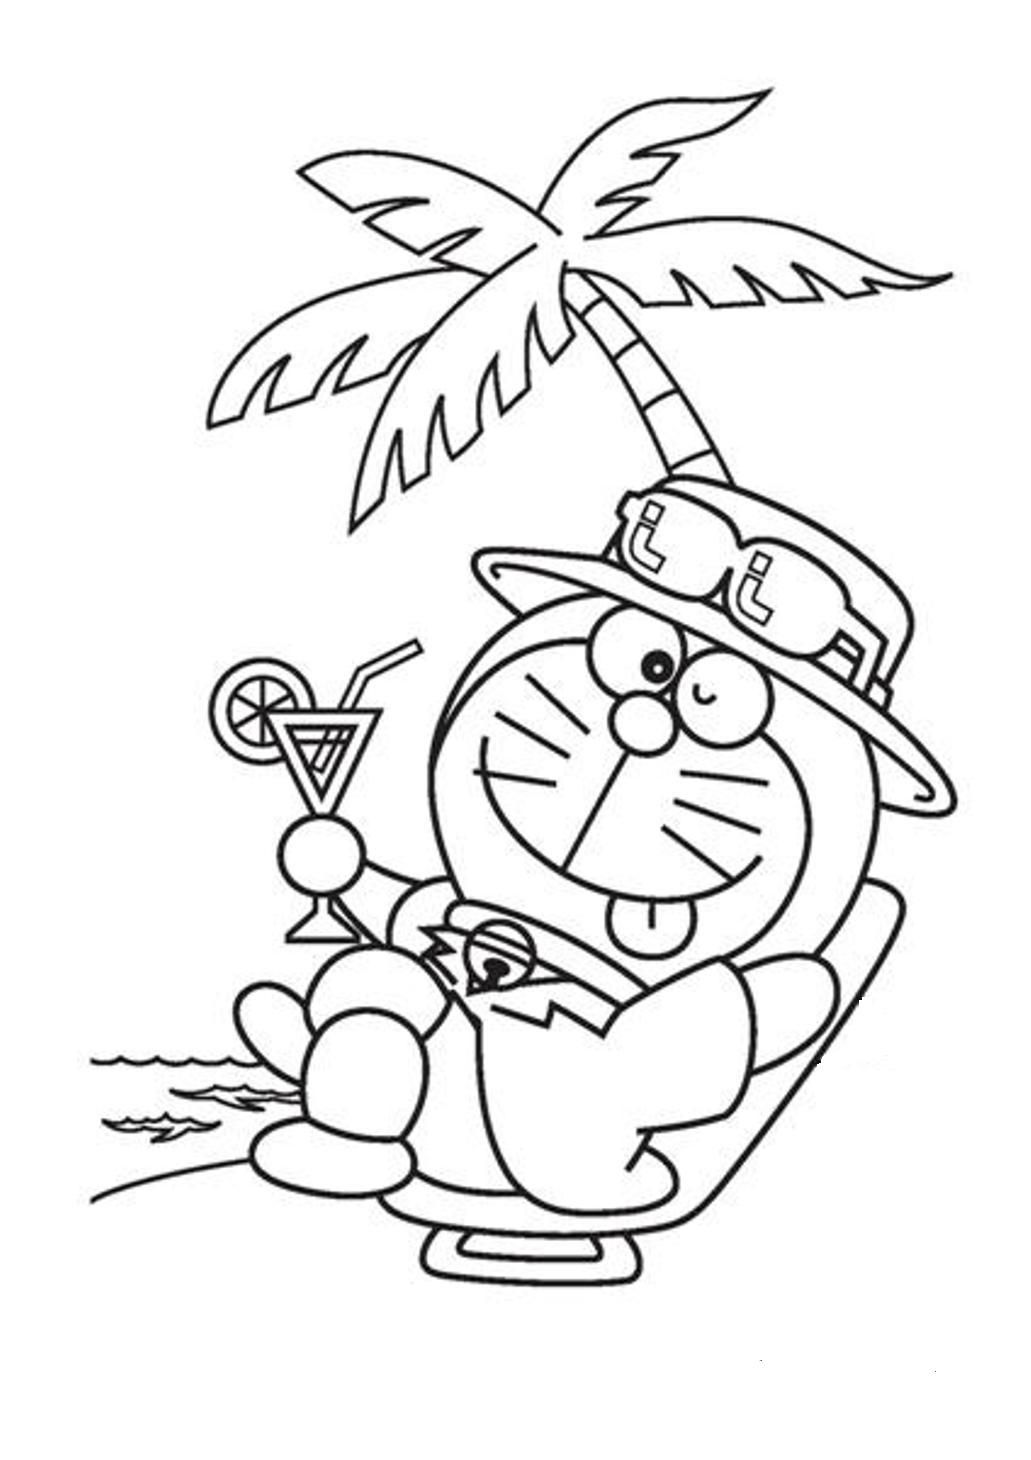 Download Doraemon At The Beach Coloring Page - Free Printable Coloring Pages for Kids